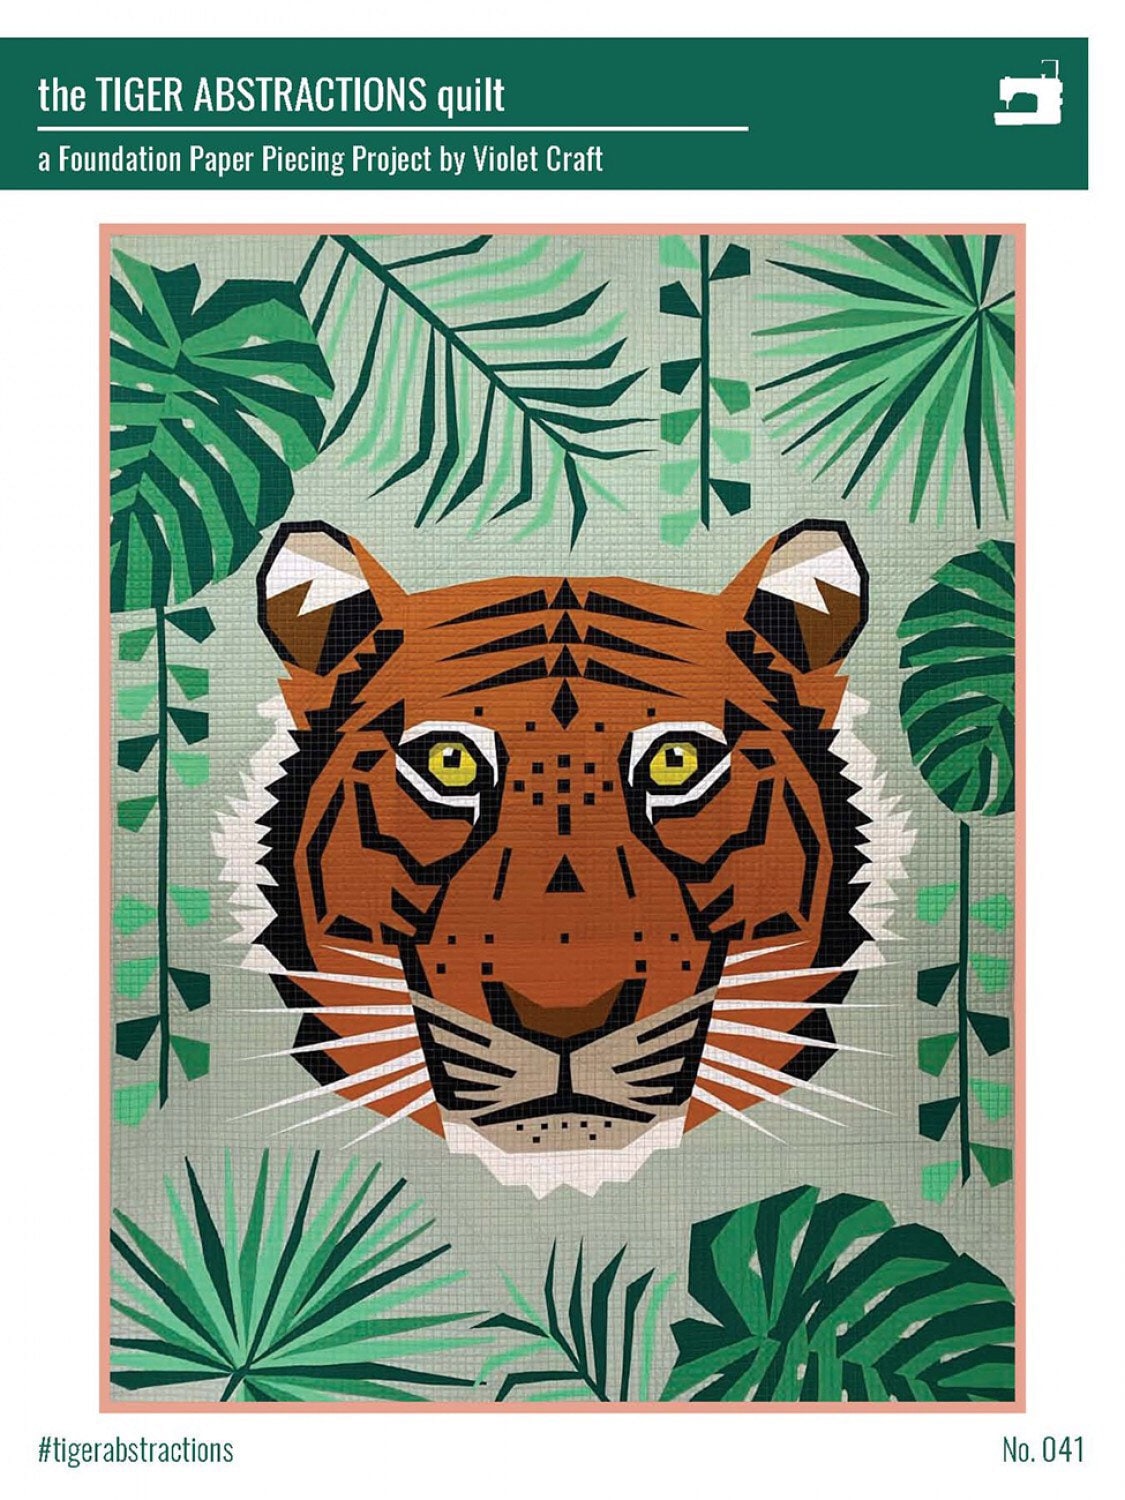 Tiger Abstractions Quilt Pattern - Violet Craft - Foundation Paper Piecing Pattern